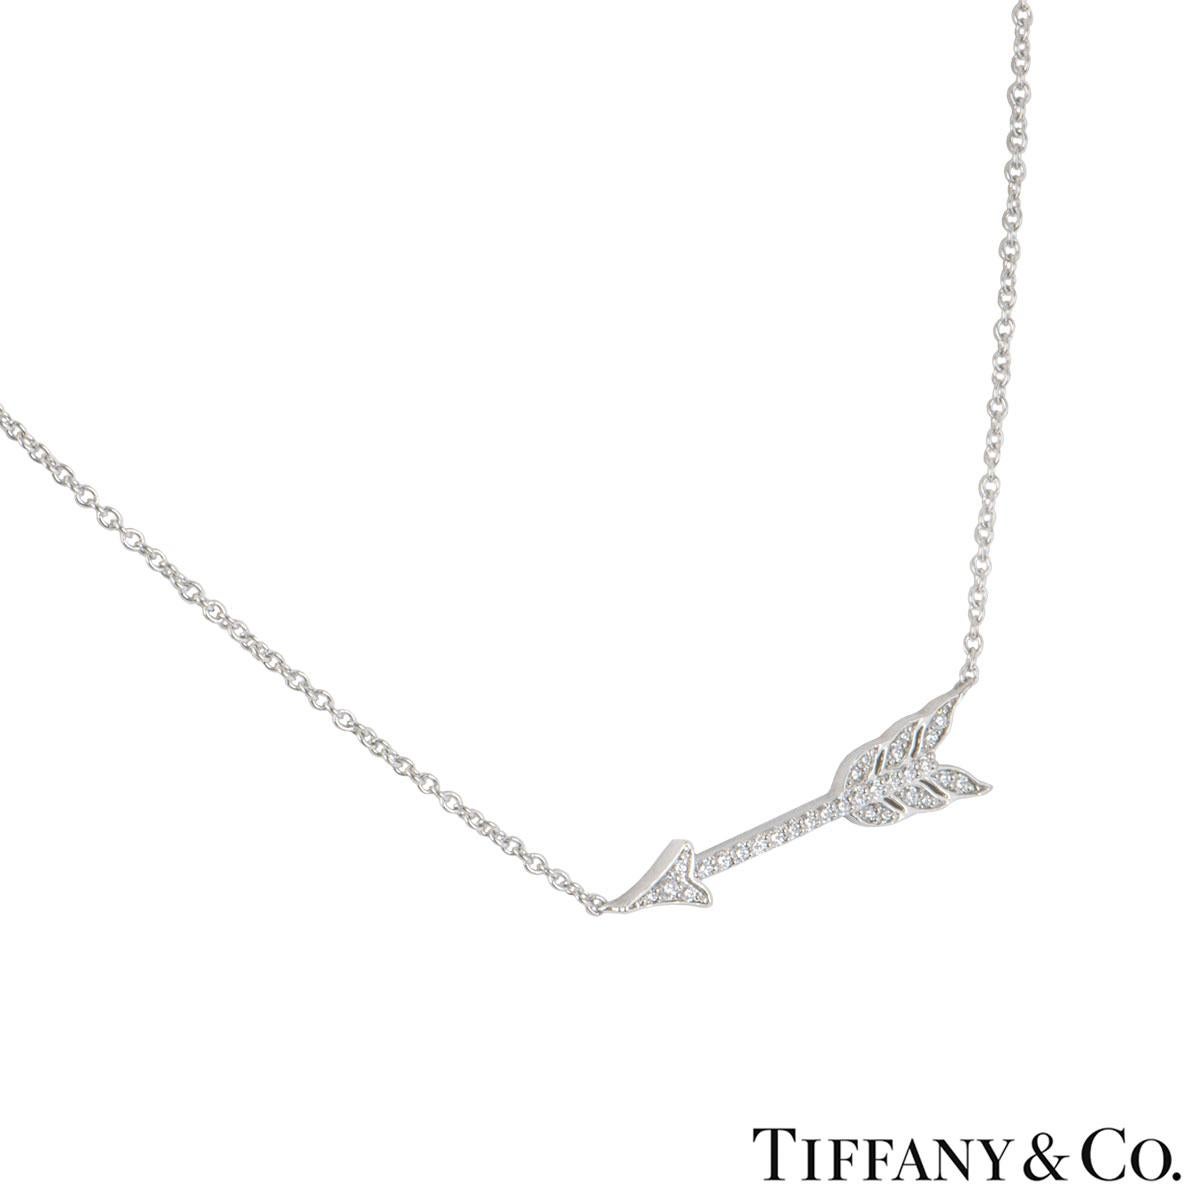 A platinum diamond pendant by Tiffany & Co. from the Hearts collection. The pendant comprises of a Arrow motif pave set with 30 round brilliant cut diamonds with an approximate total weight of 0.20ct. The arrow motif measures 2.30cm and the chain